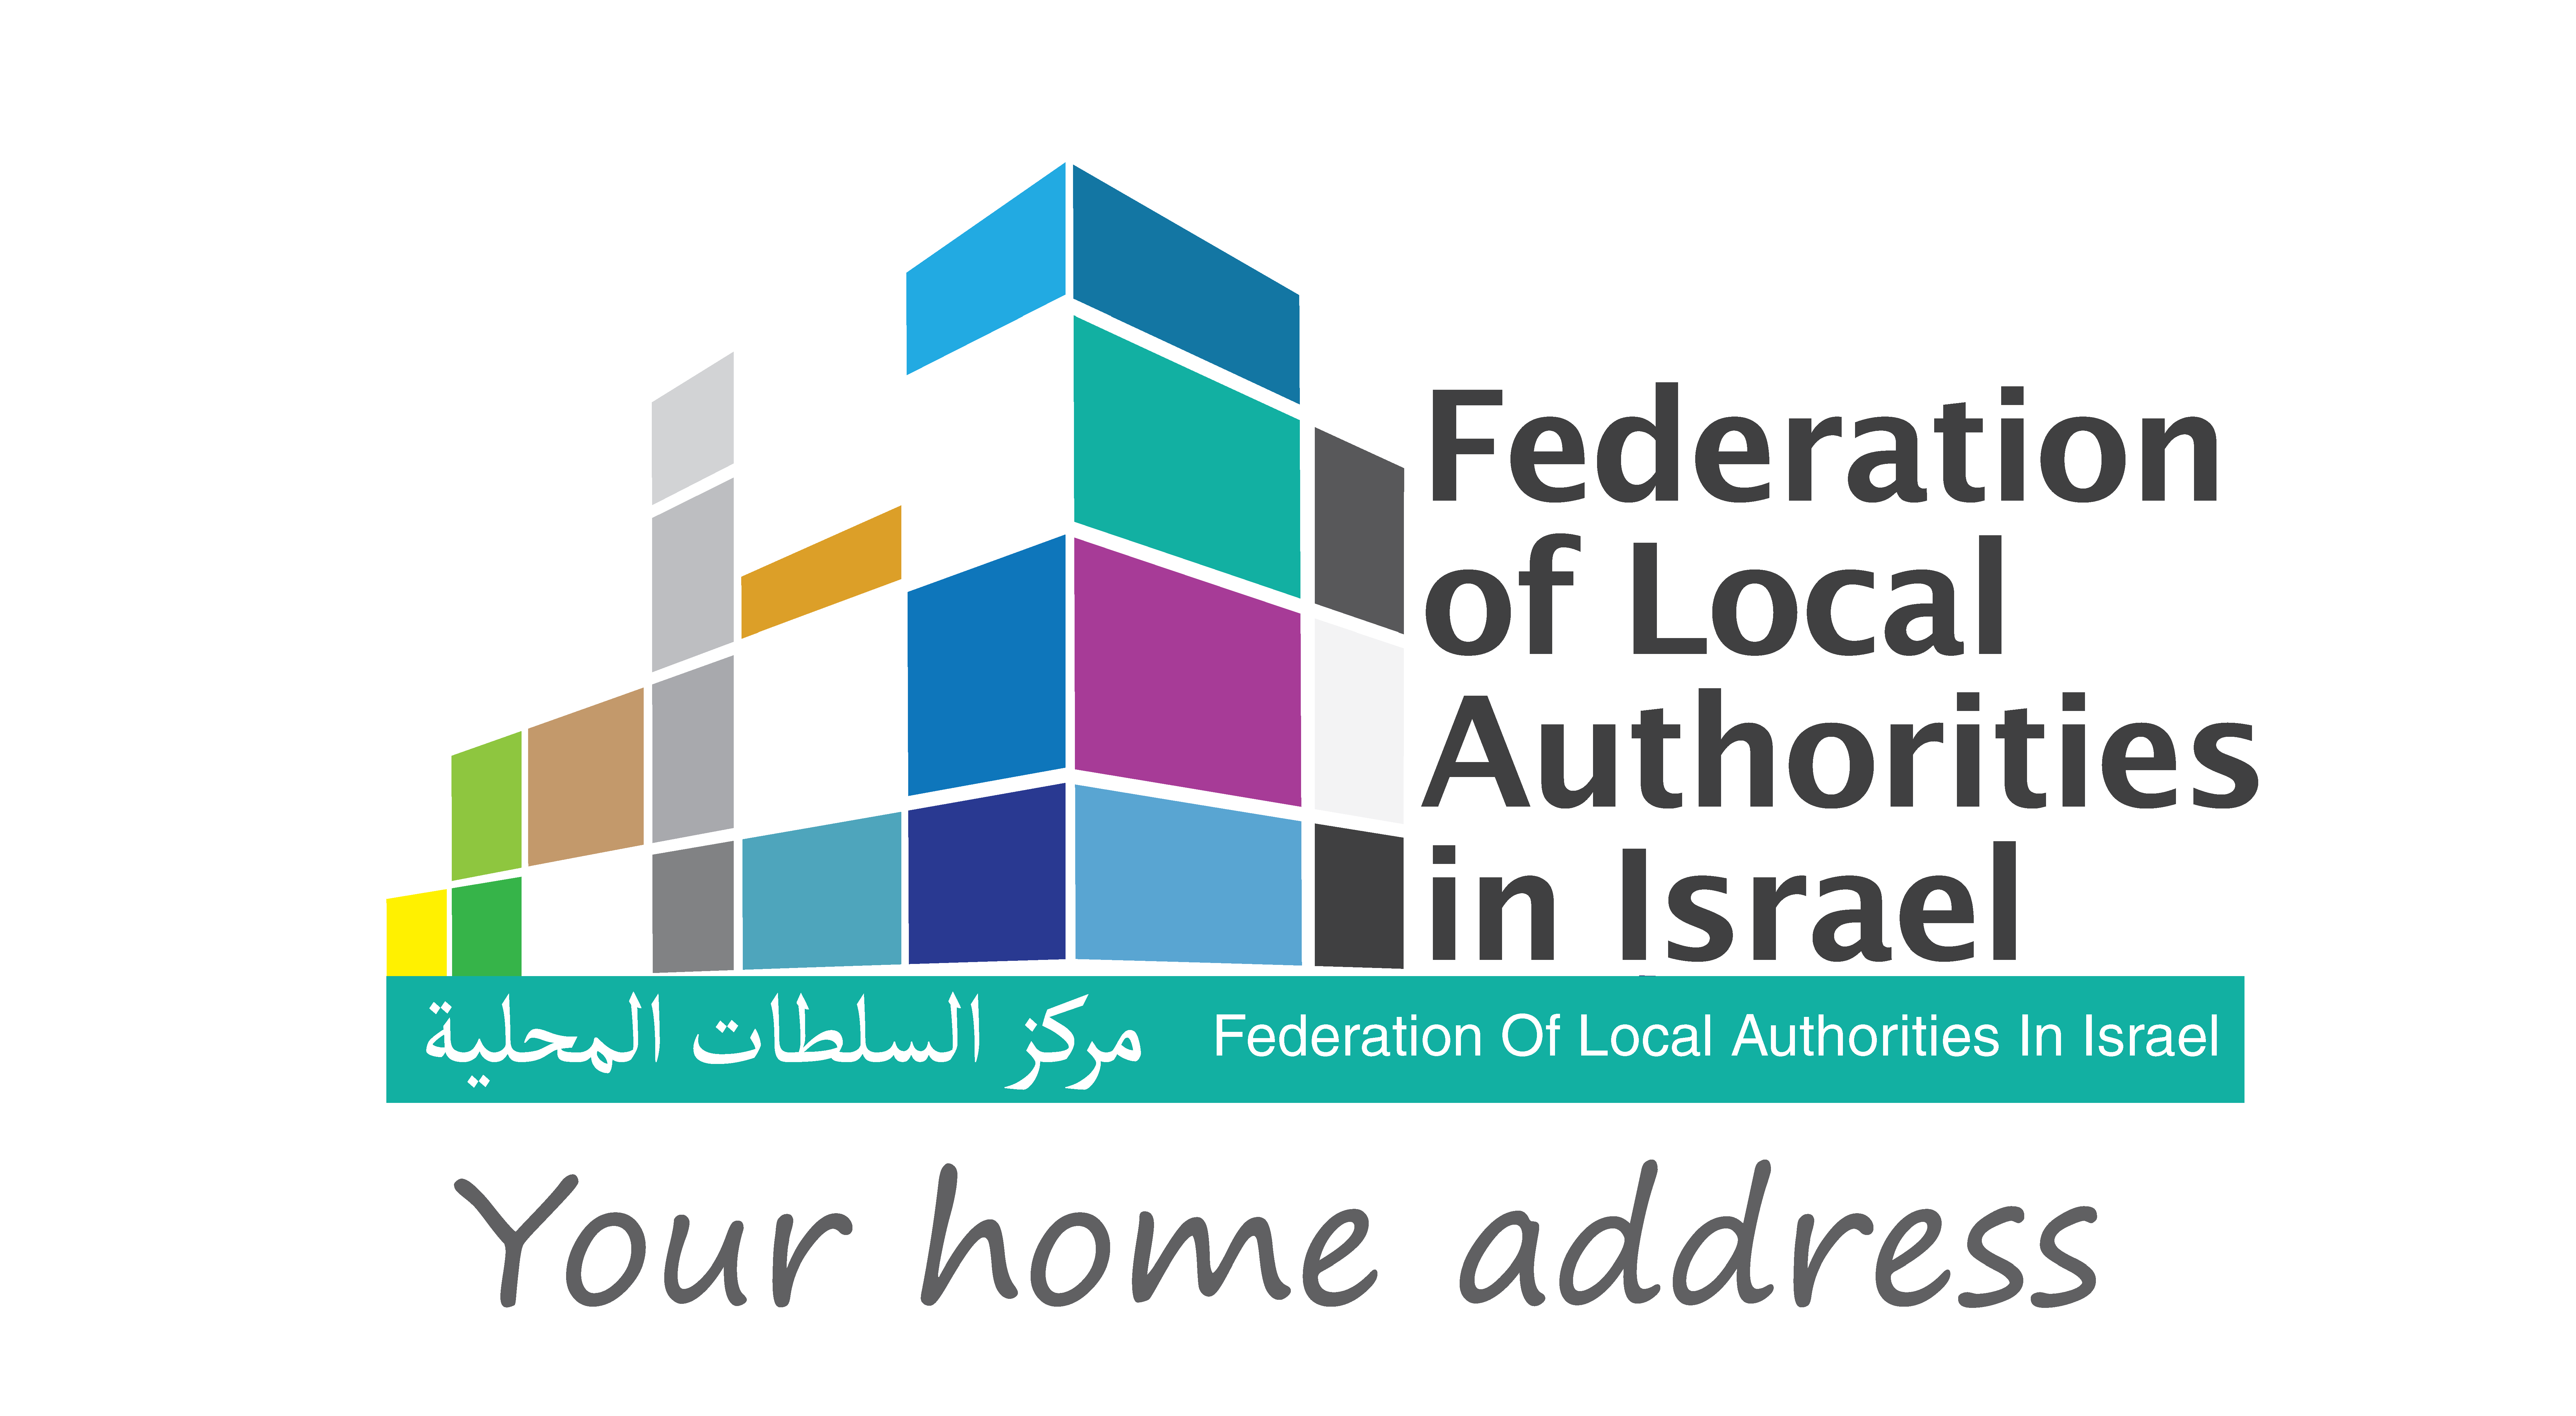 Federation of Local Authorities in Israel logo in English